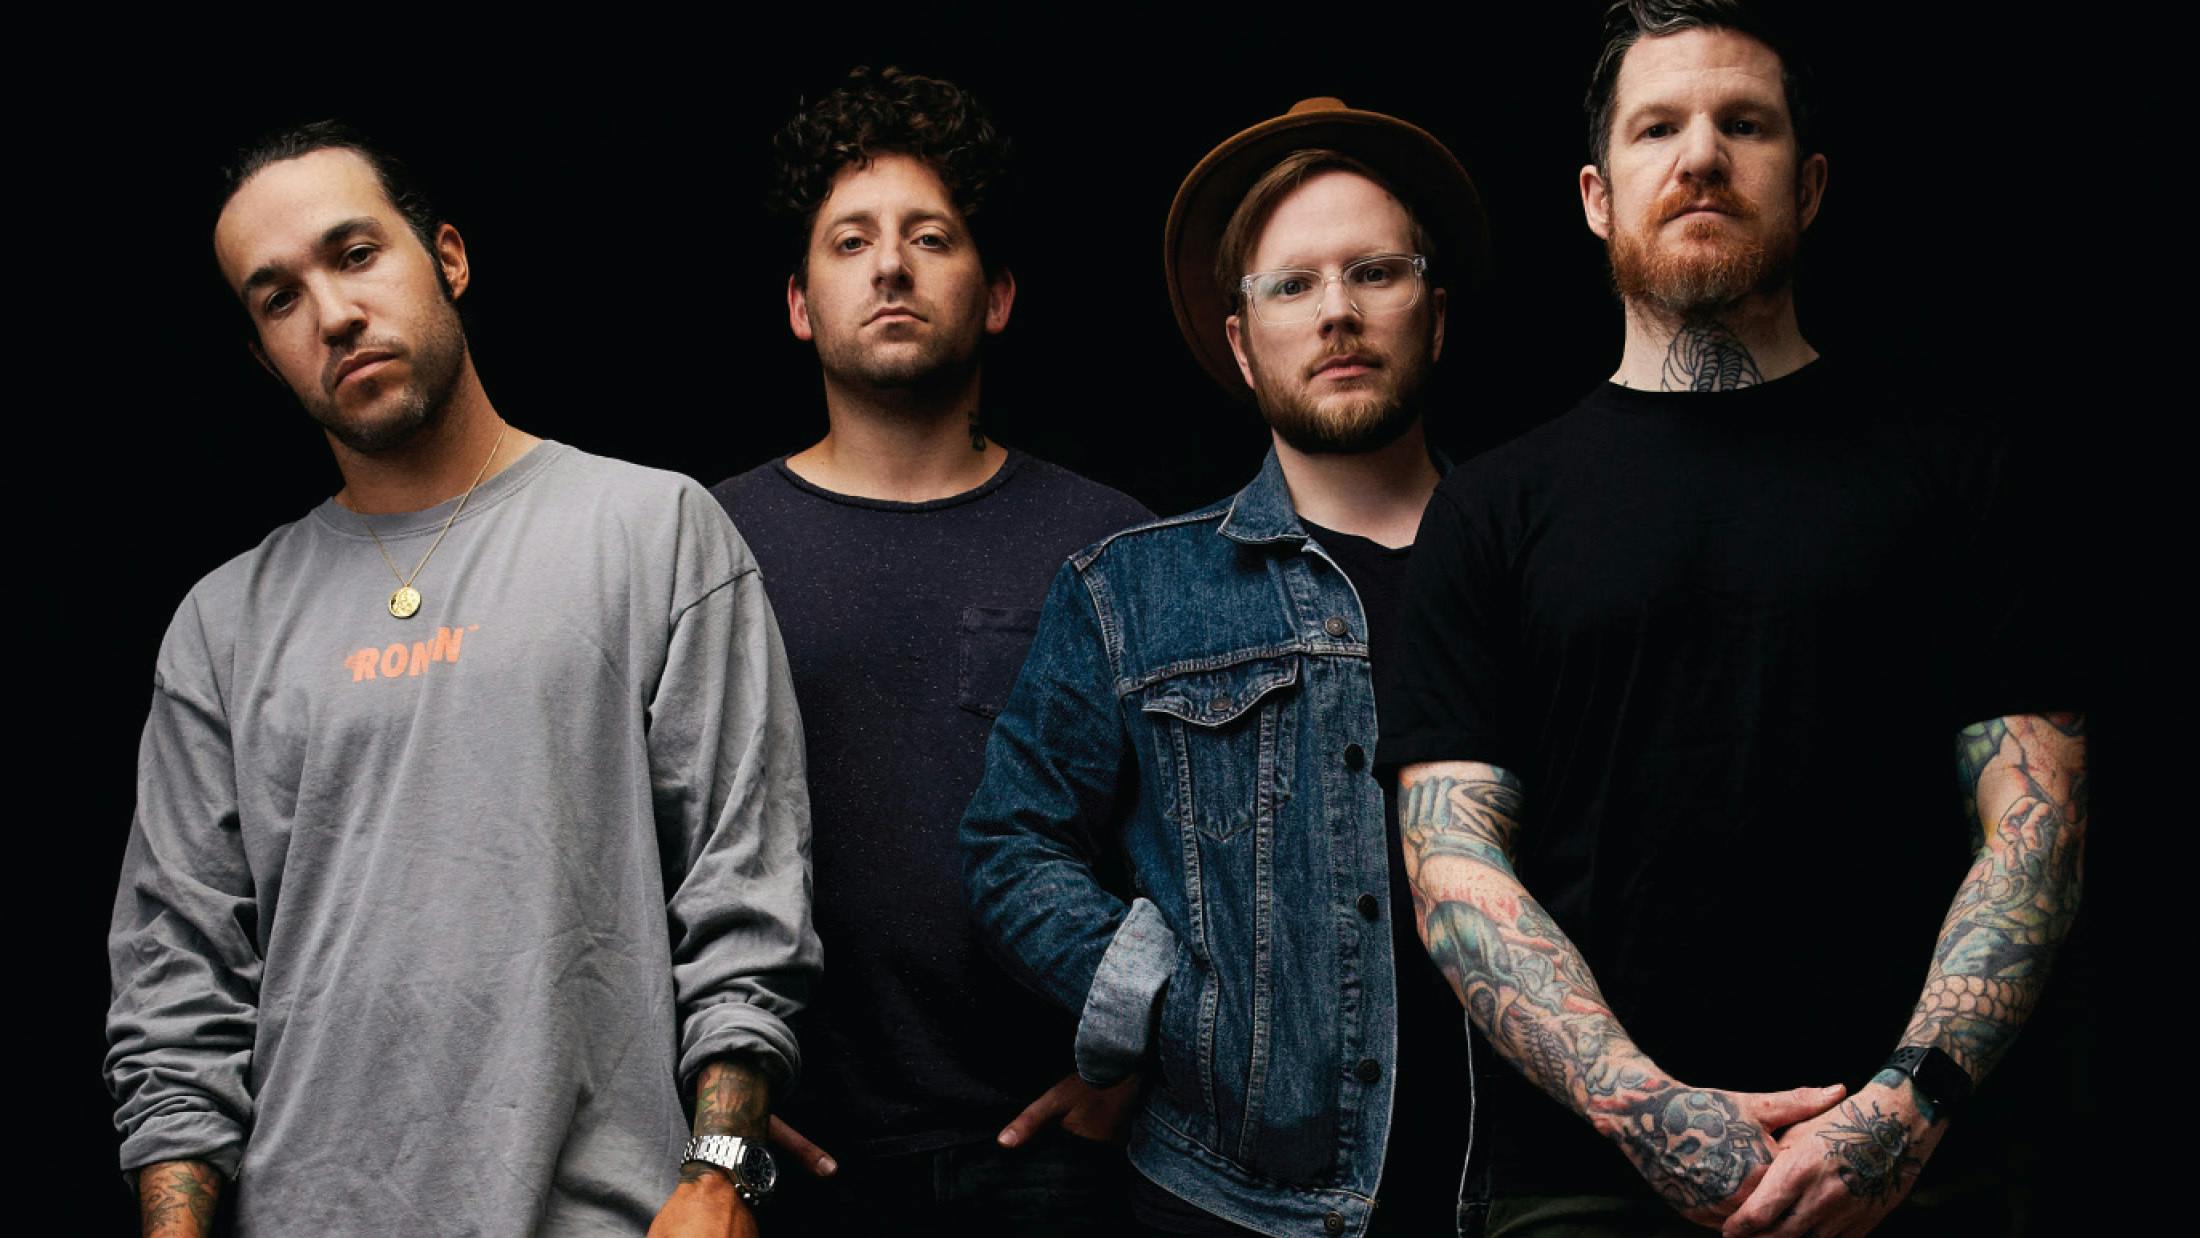 This is Fall Out Boy's setlist from the Hella Mega Tour